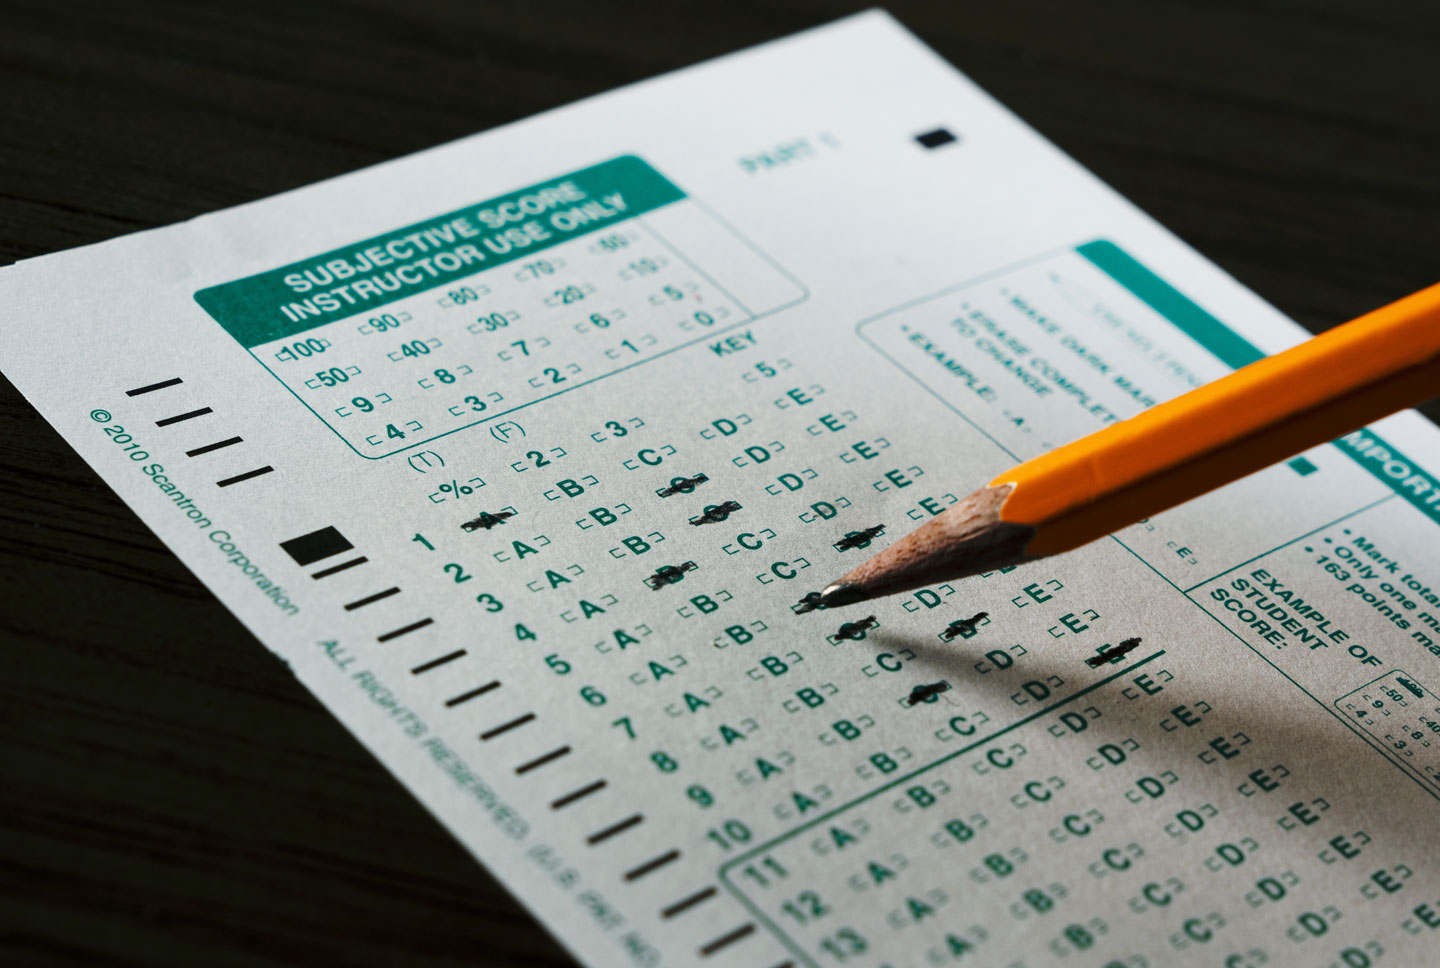 Scantron sheet being filled out with a pencil